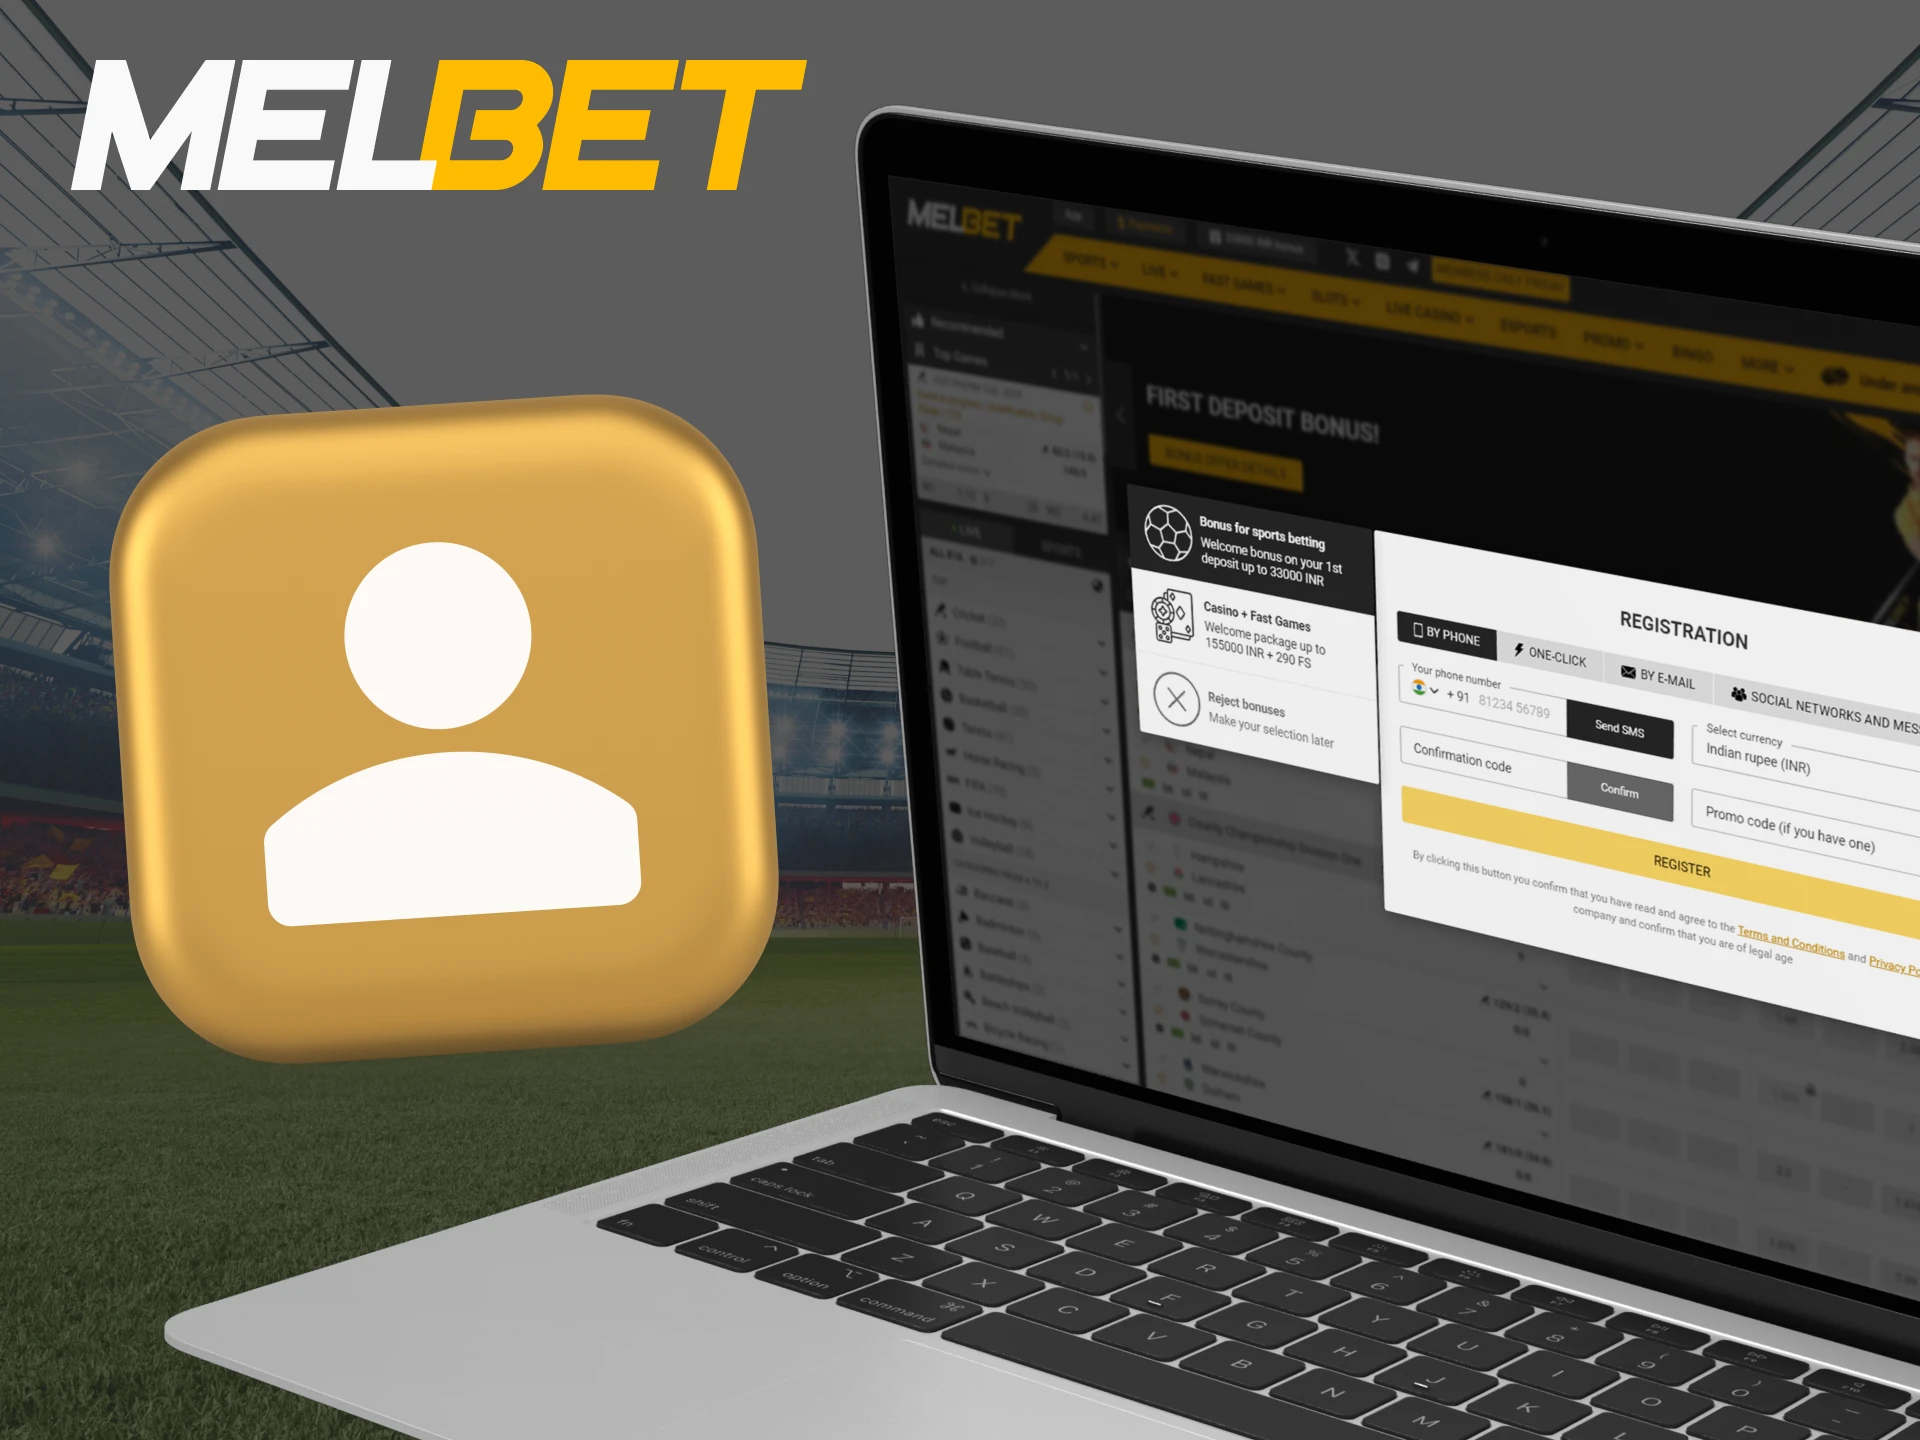 To start betting and playing at Melbet, register.